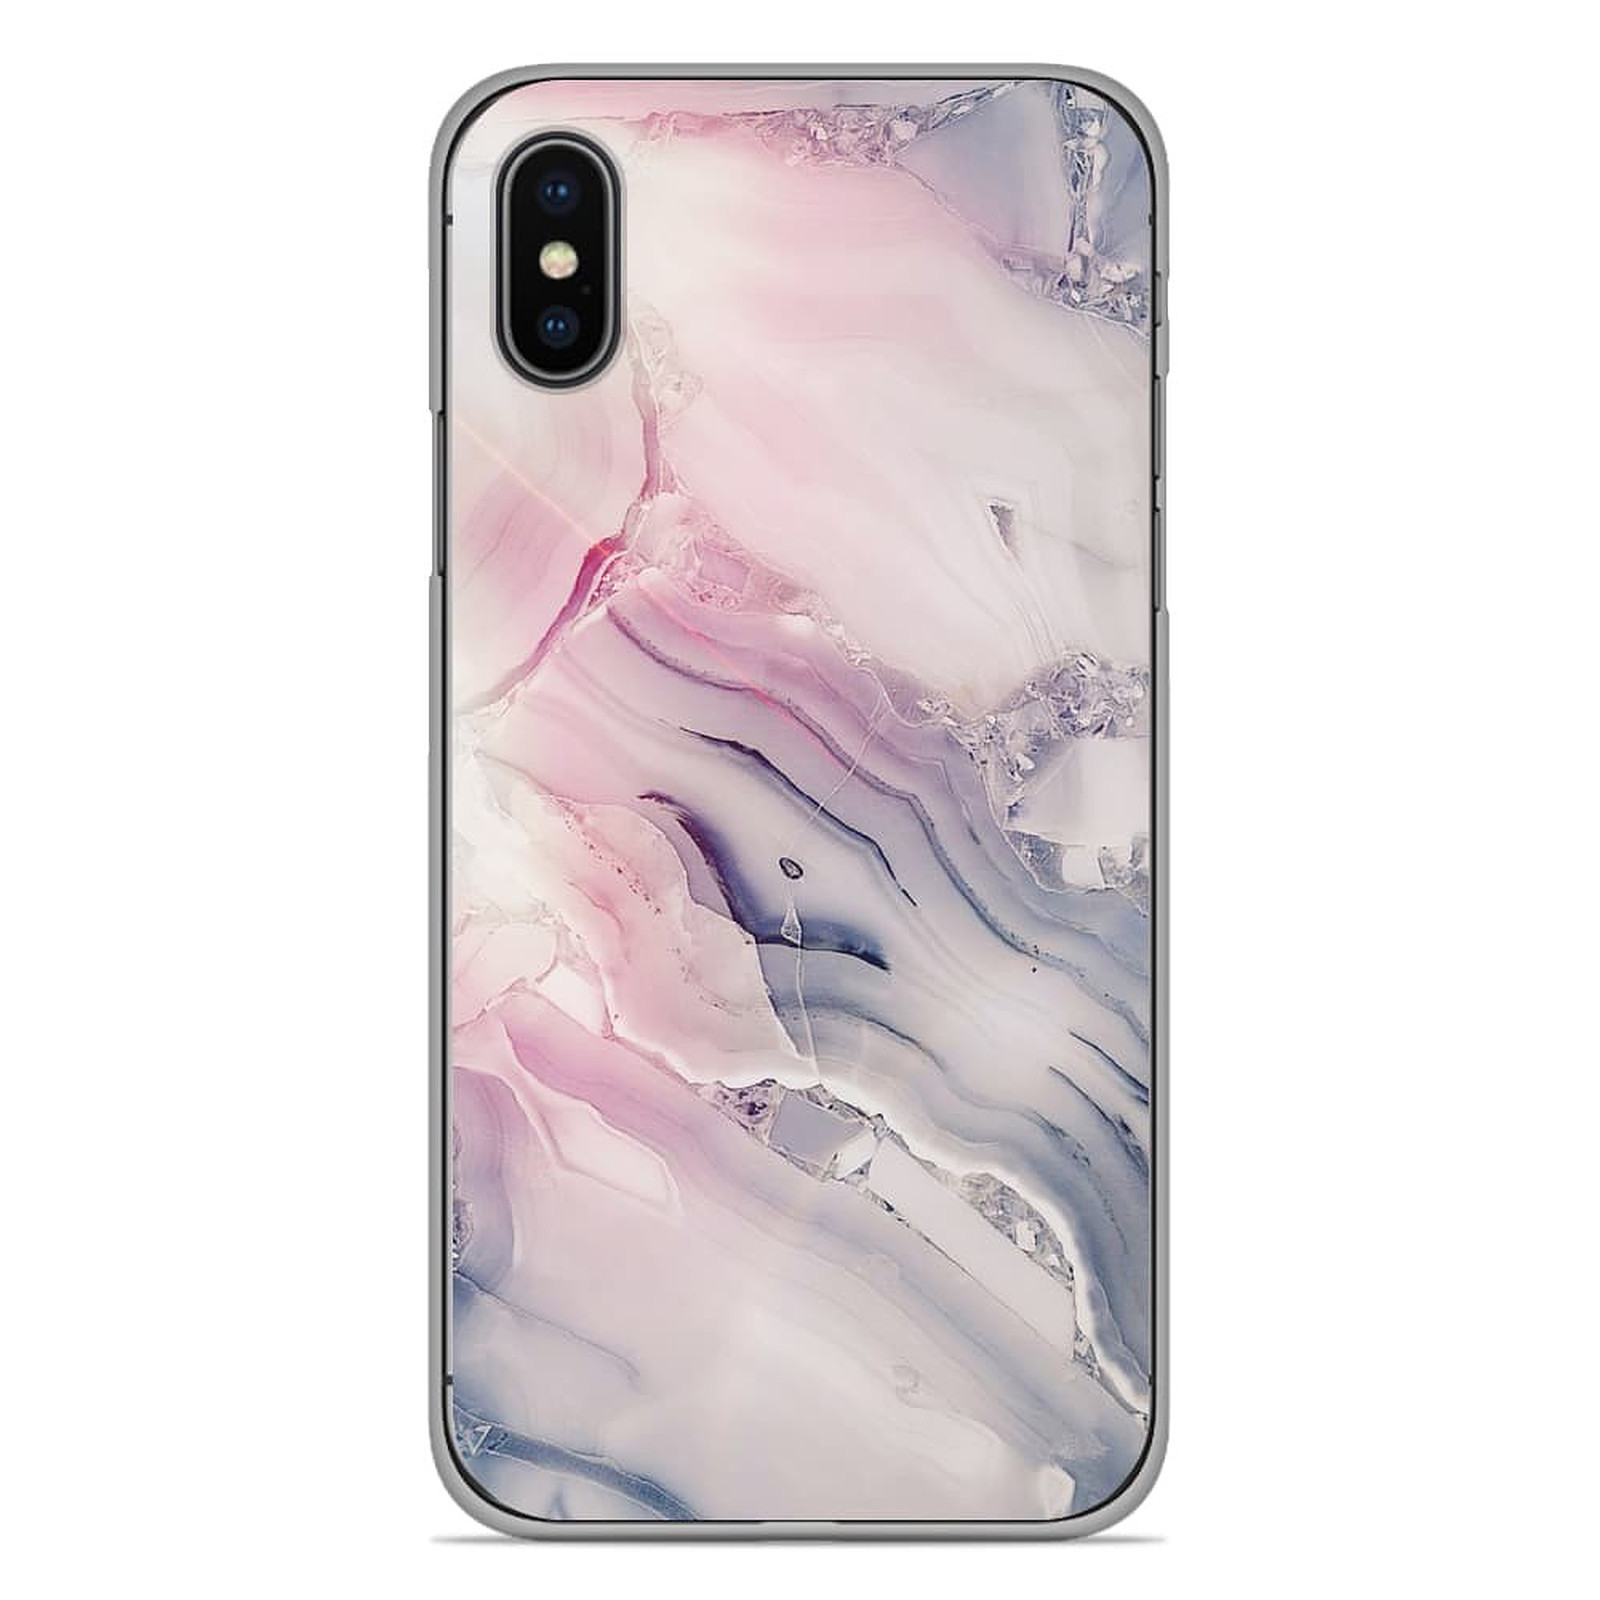 1001 Coques Coque silicone gel Apple iPhone X / XS motif Zoom sur Pierre Claire - Coque telephone 1001Coques